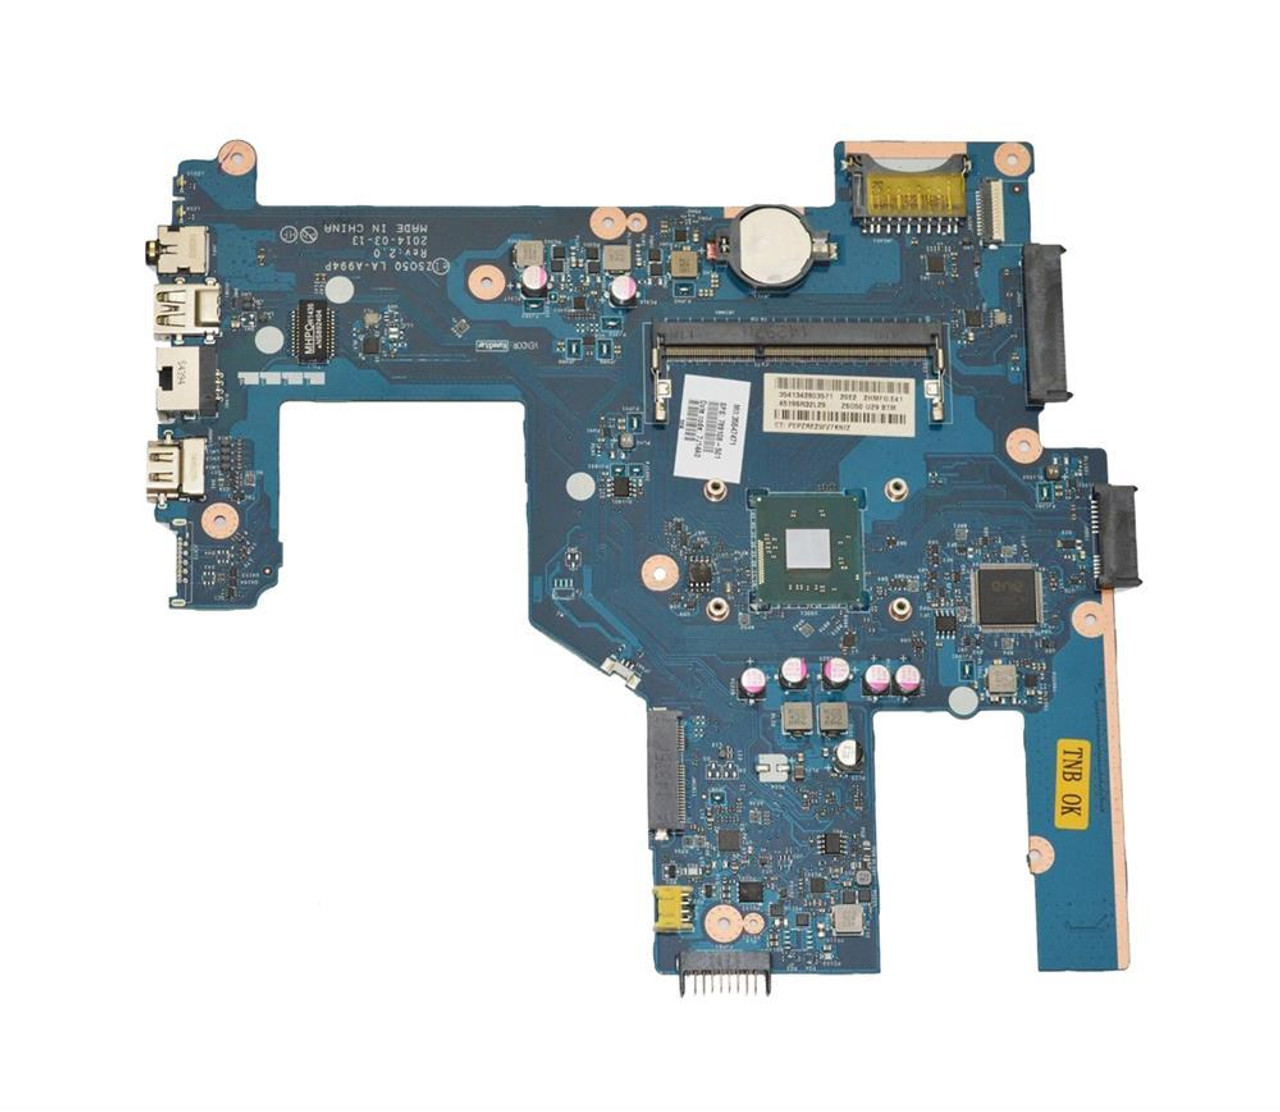 789108-001 HP System Board (Motherboard) With 1.86GHz Intel Celeron N2920  Processor for 15-r032ds (